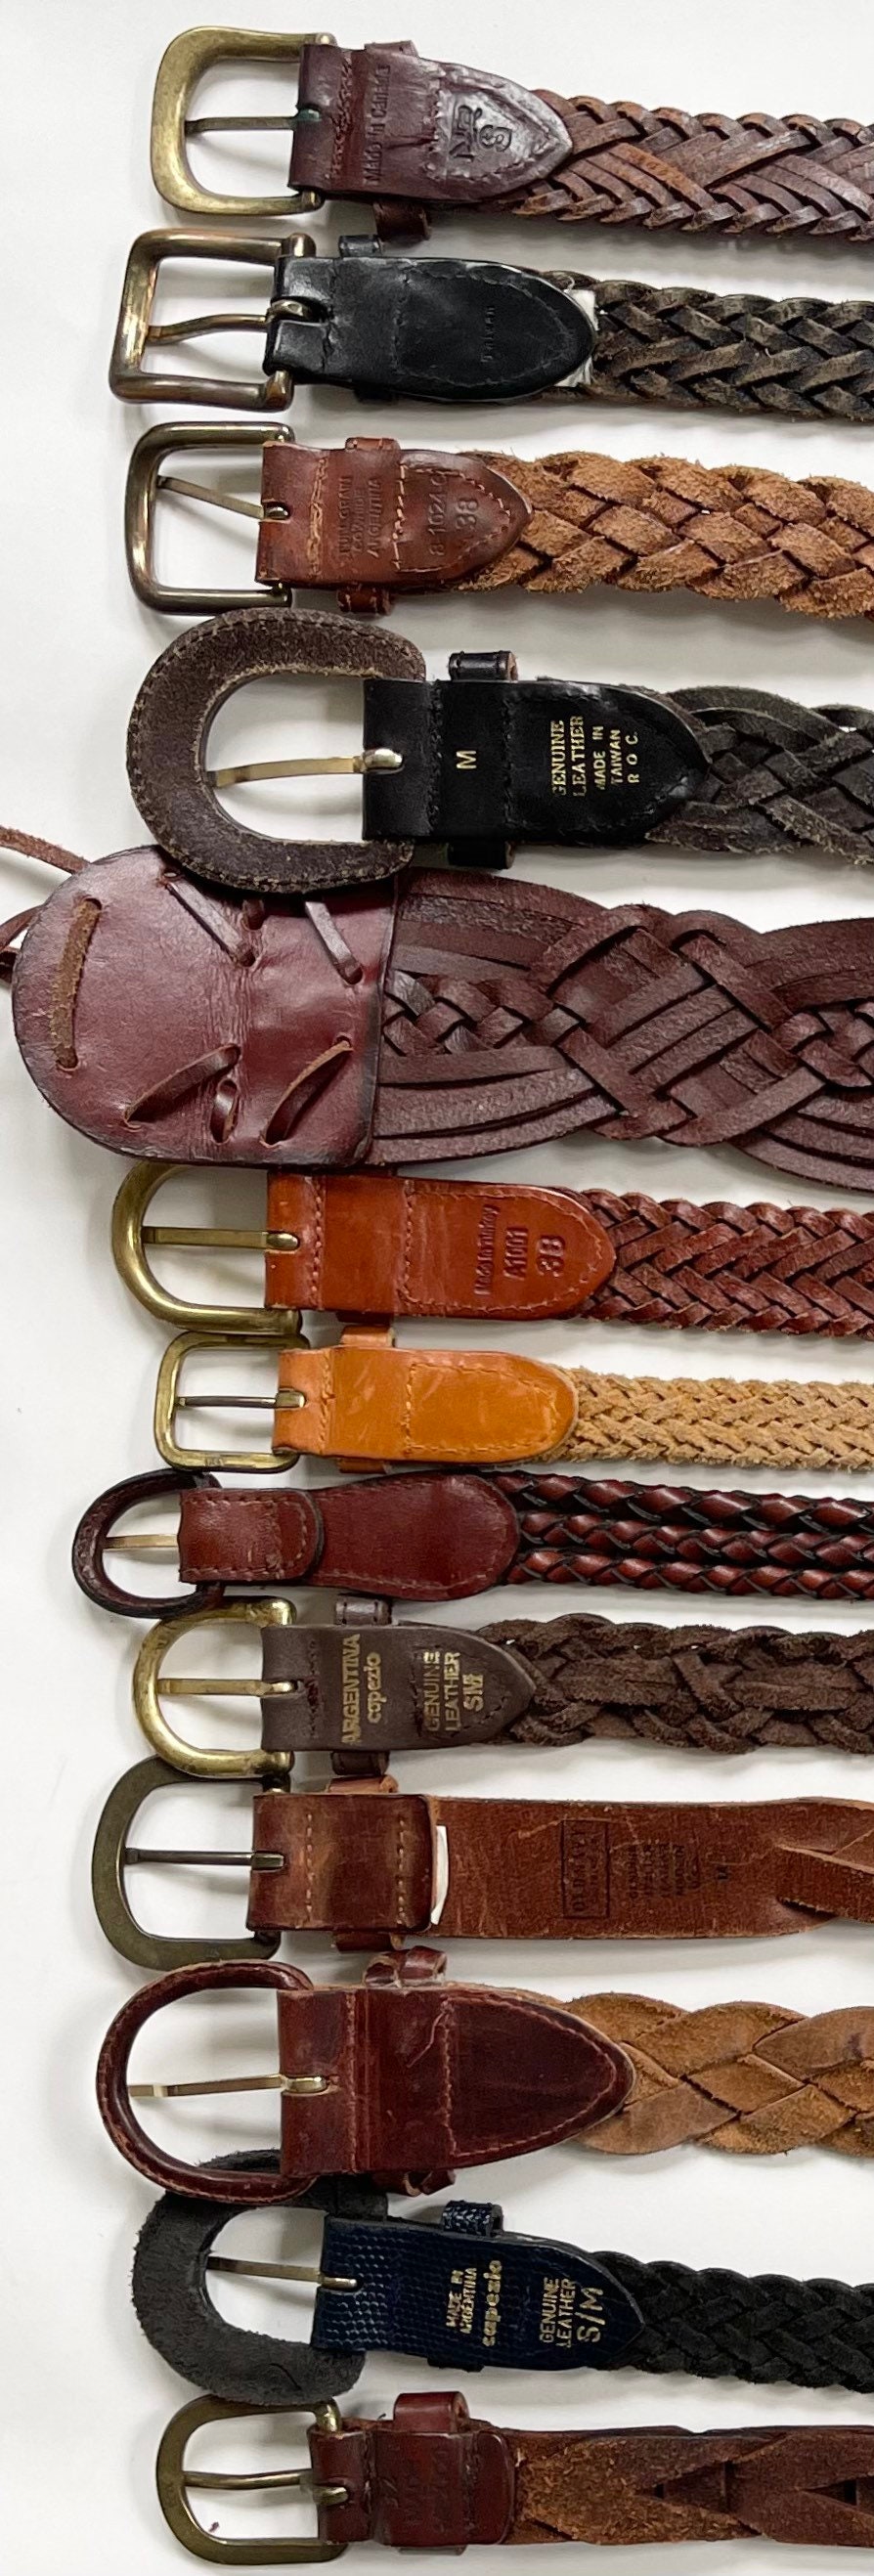 Braided Leather Belt Belts Vintage Leather Goods Woven - Etsy